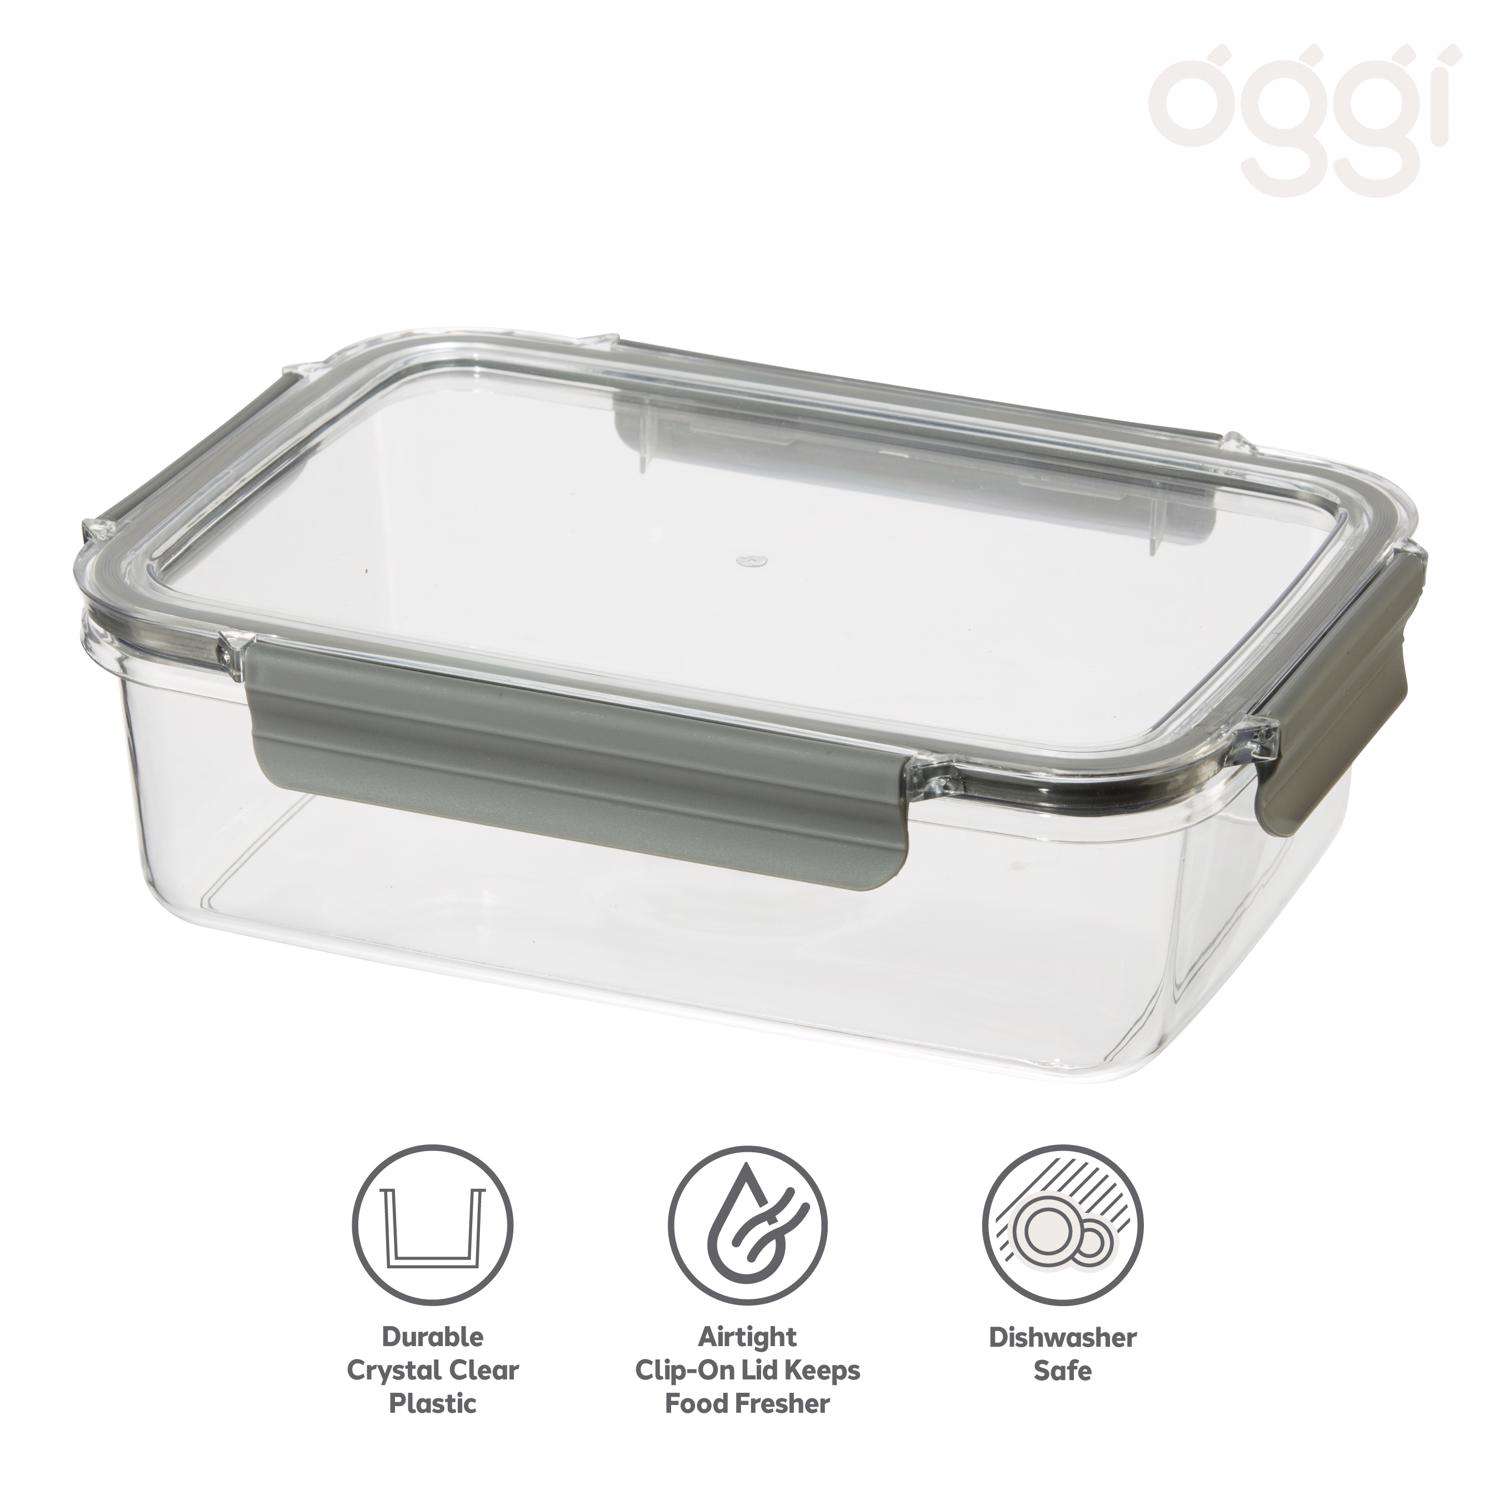 Lock & Lock Purely Better 4-Pack 21 oz. Rectangular Glass Food Storage Containers Clear